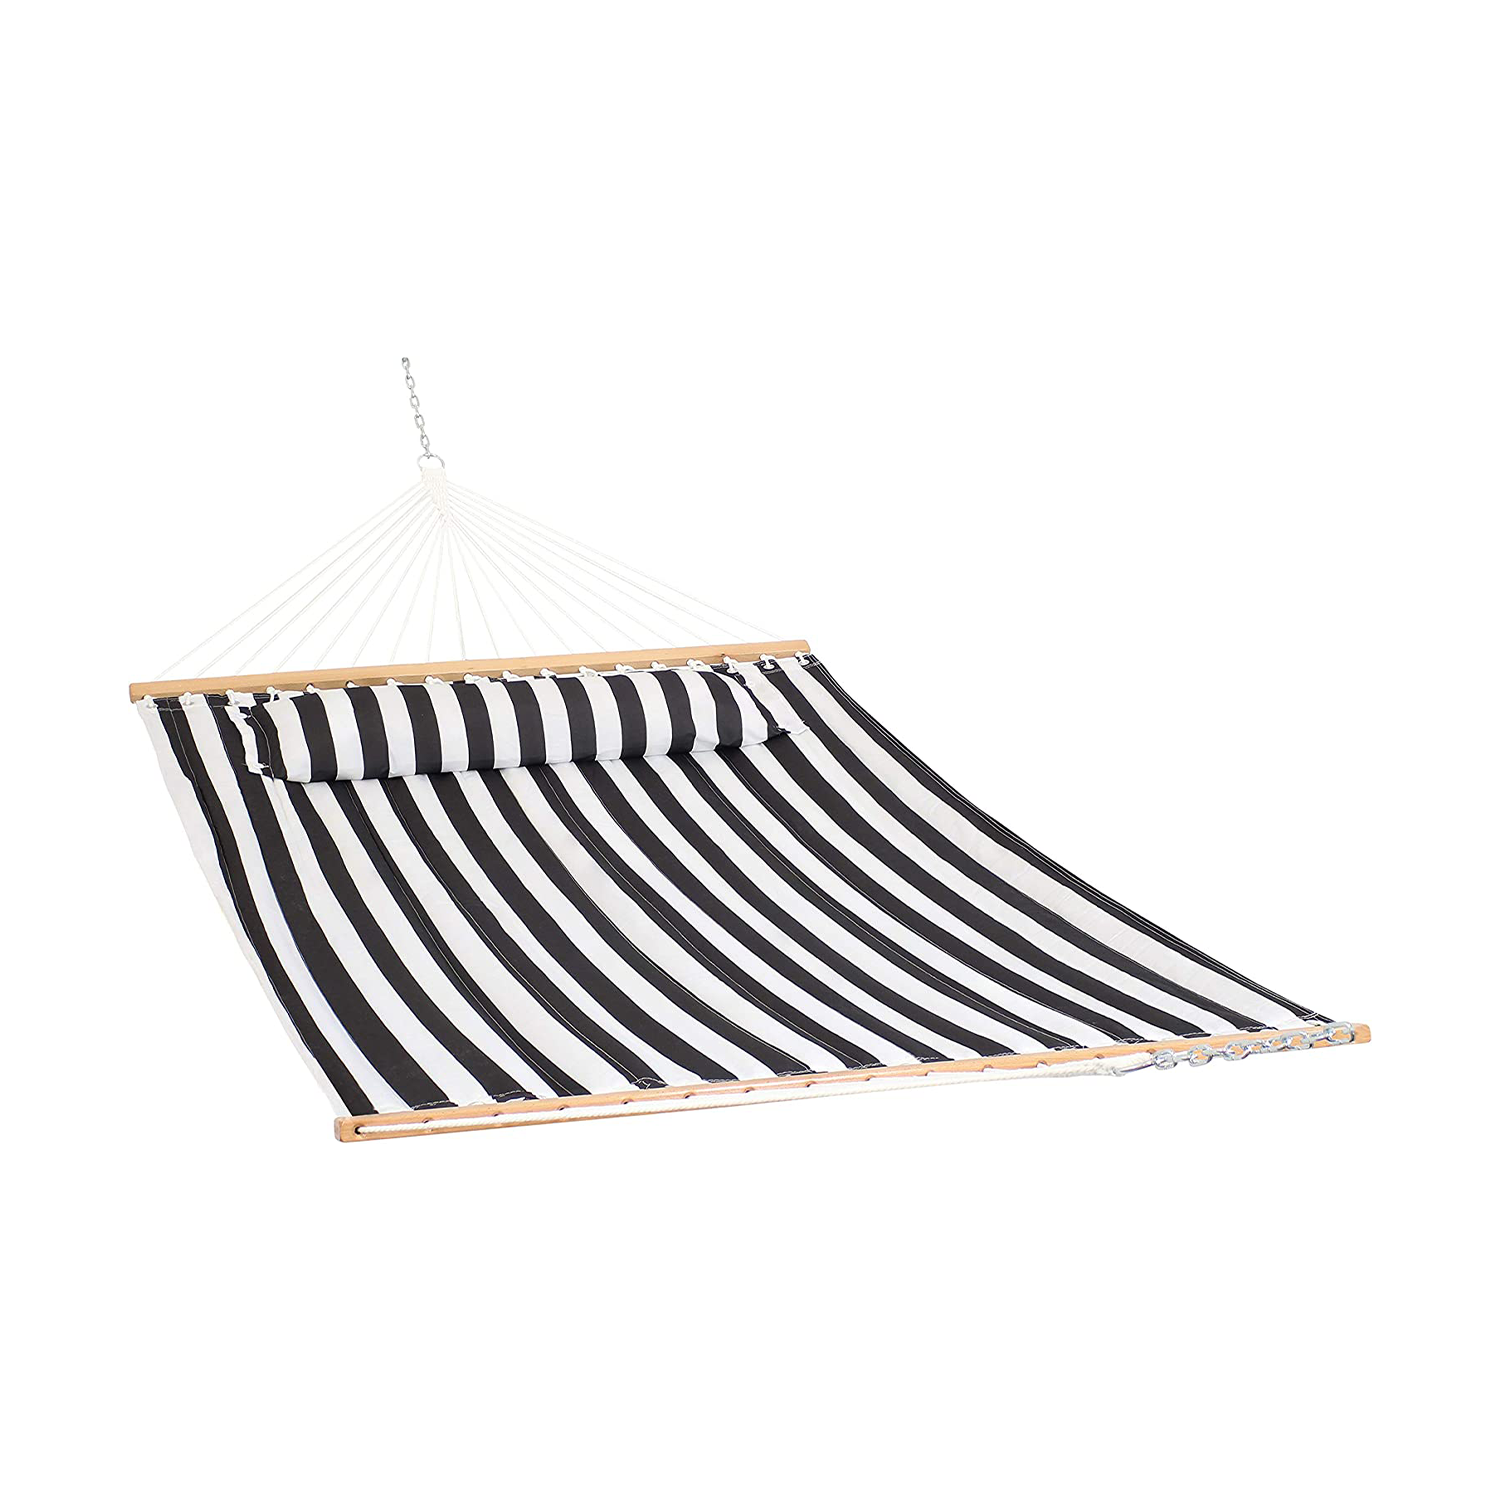 Sunnydaze Quilted Fabric Hammock and Pillow